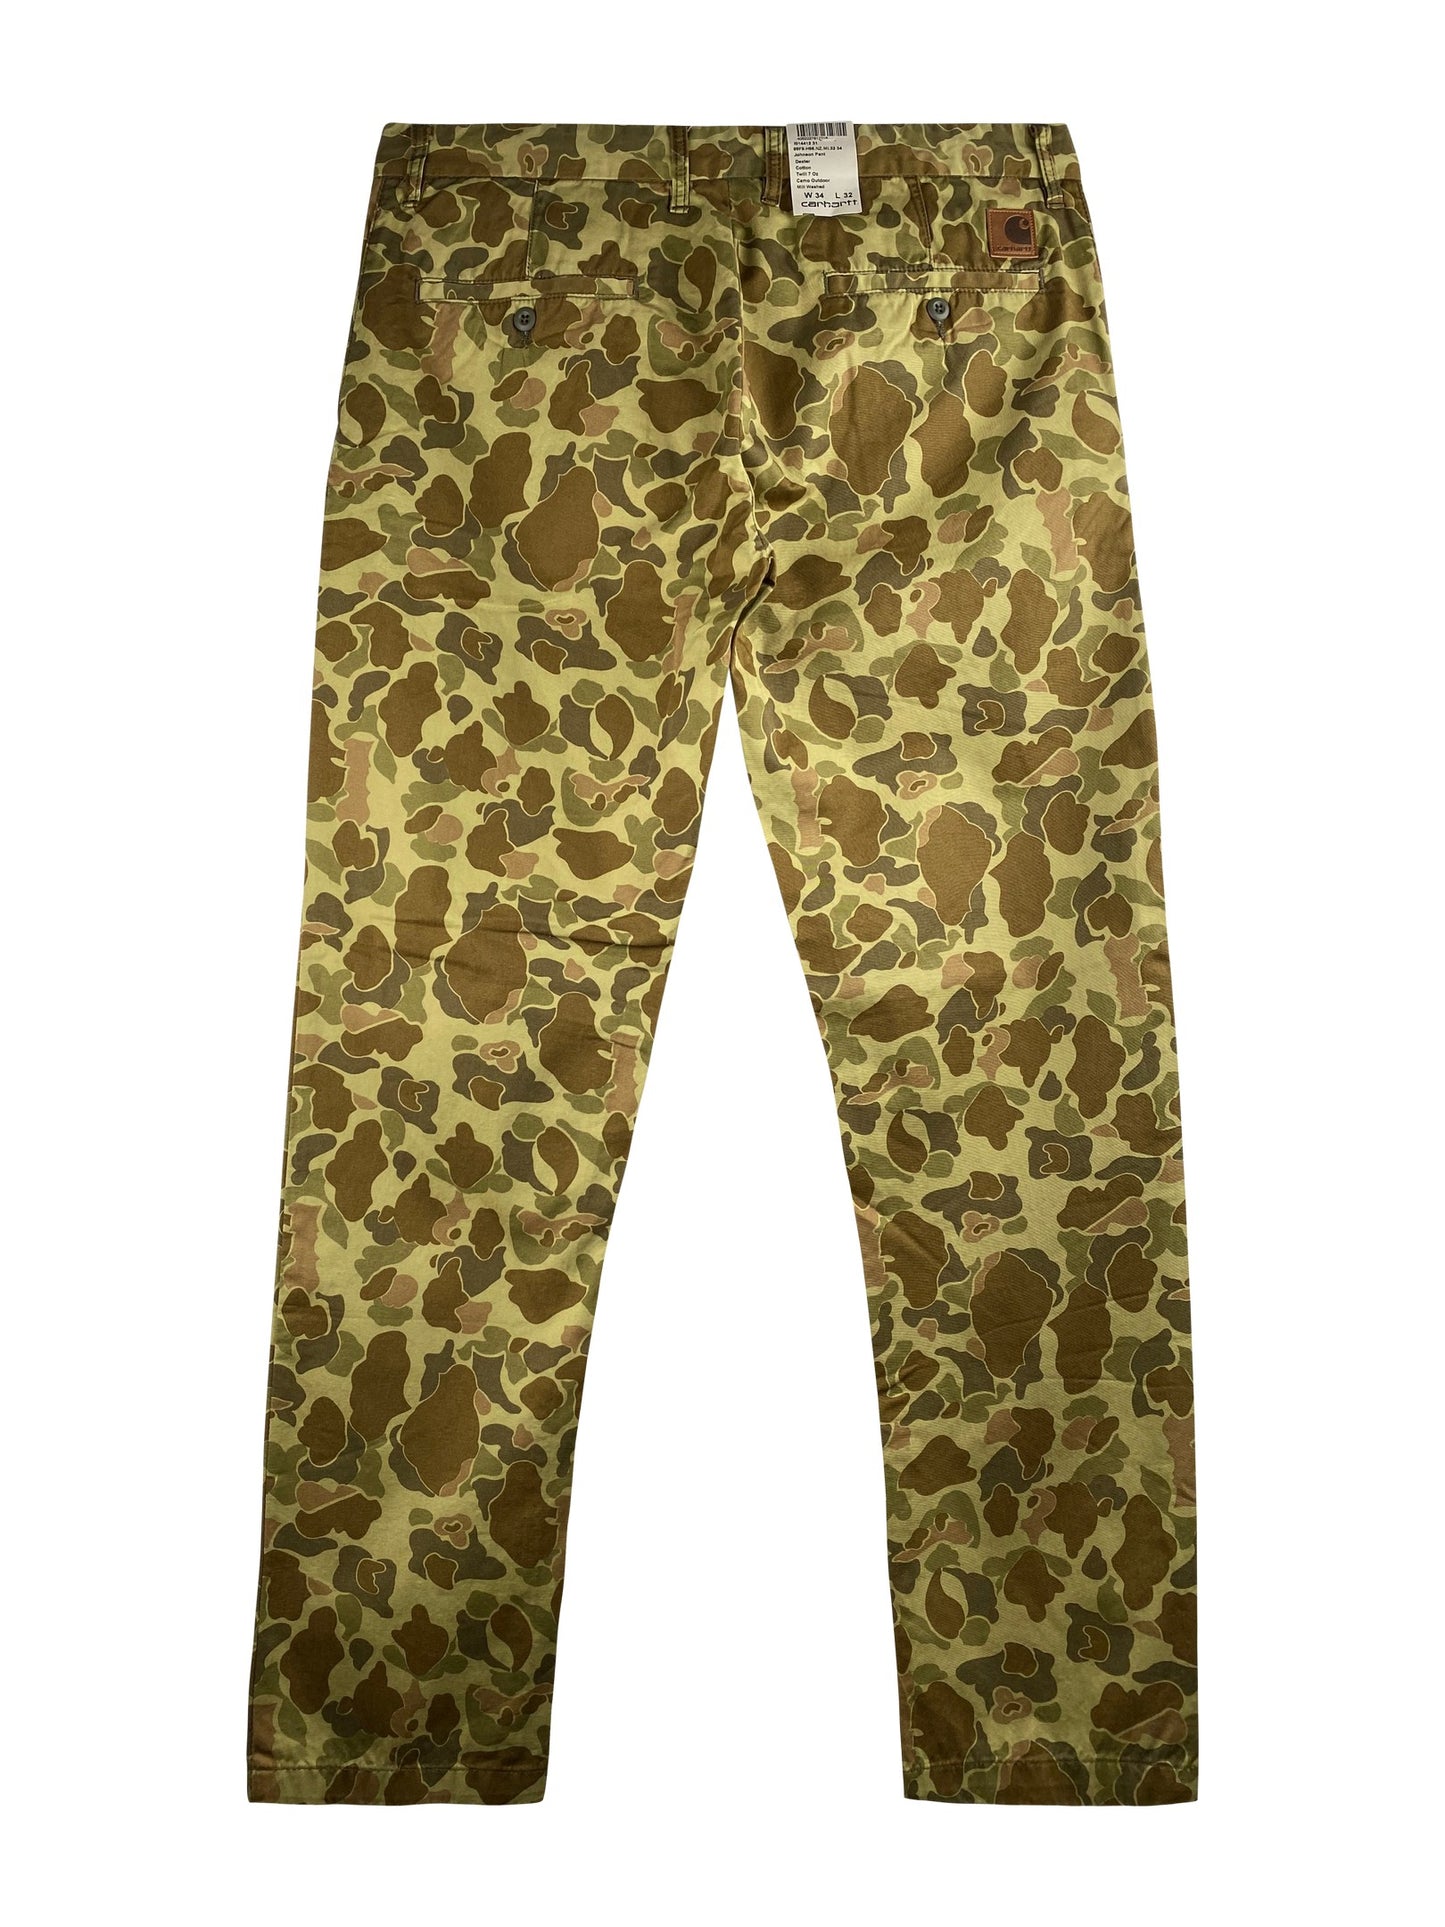 Carhartt Hose “Johnson Pant” - camo outdoor mill washed